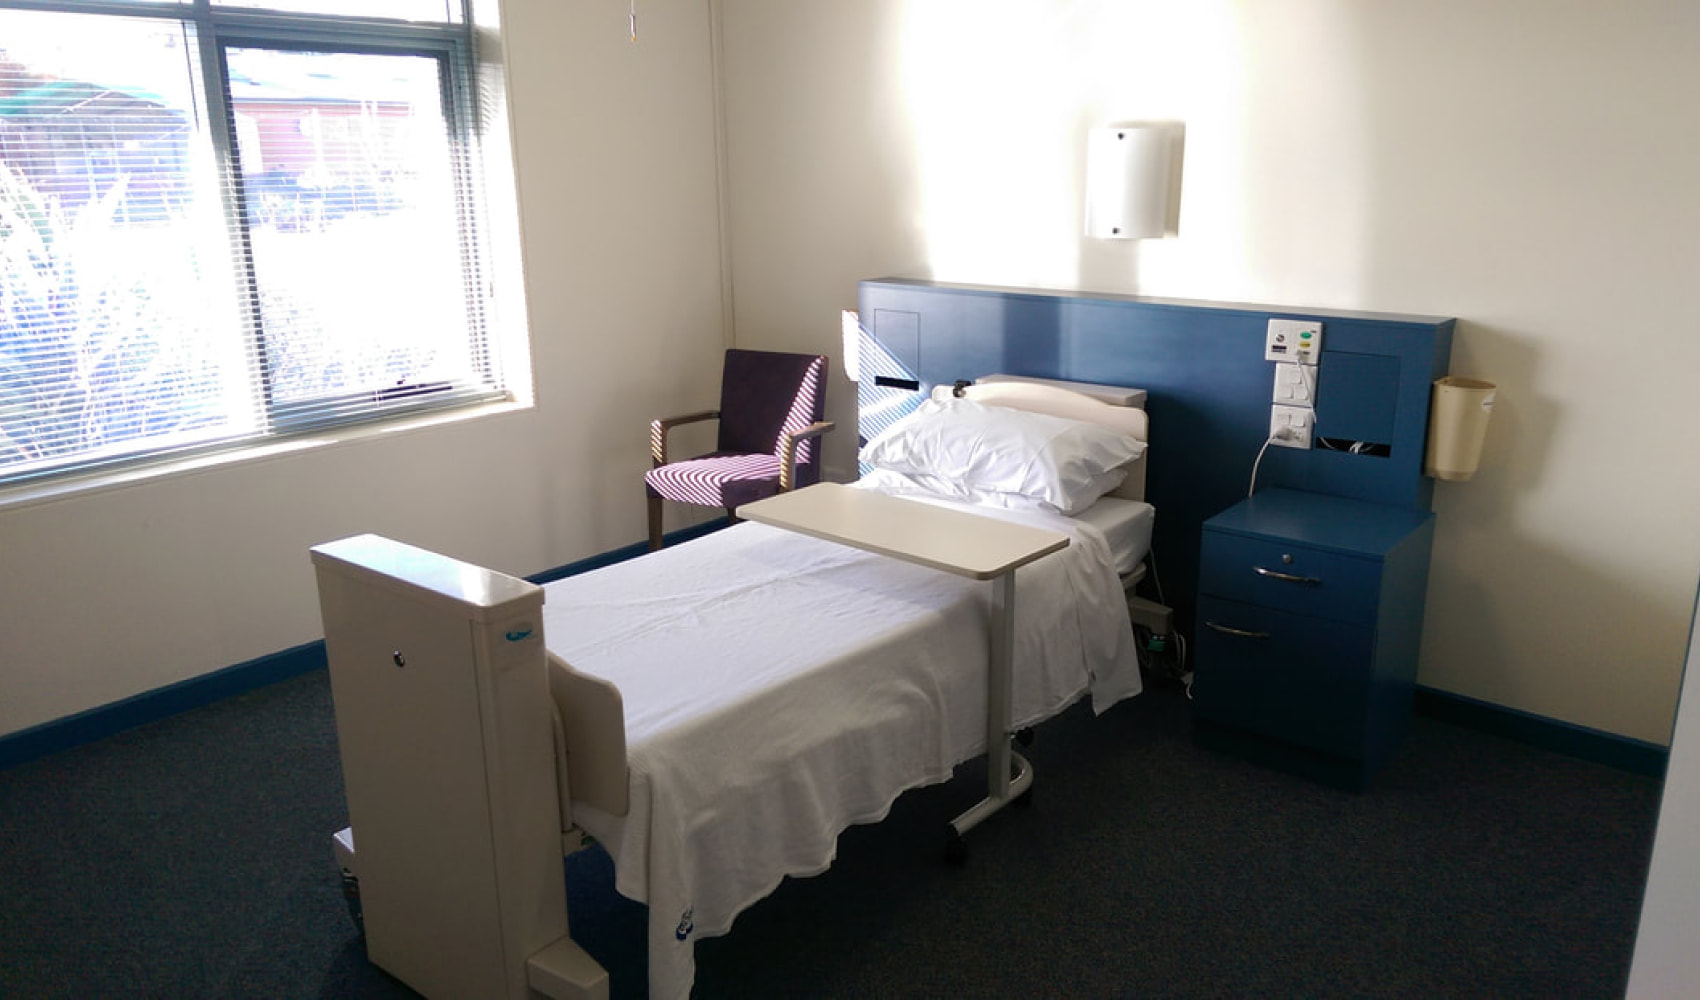 A bed in one of the nursing home rooms. 